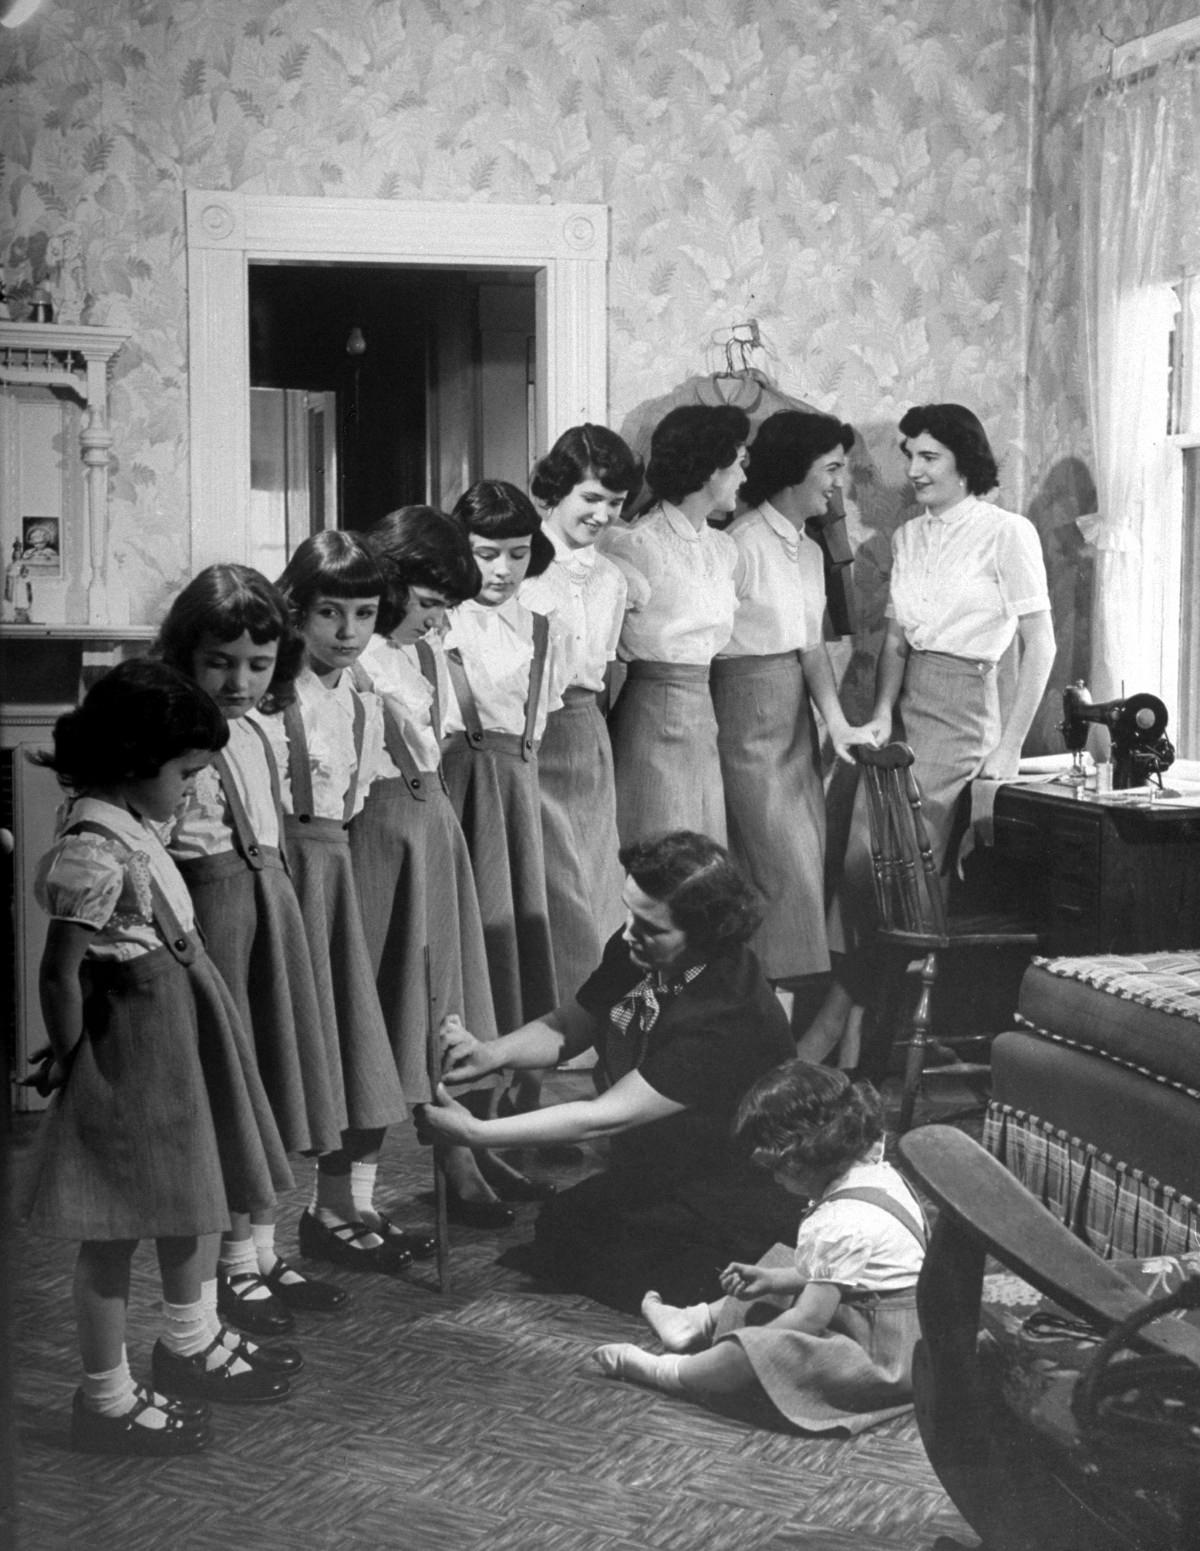 Mrs. O’Neil pinned up hems on all ten of her daughters’ dresses in preparation for Easter, 1952.